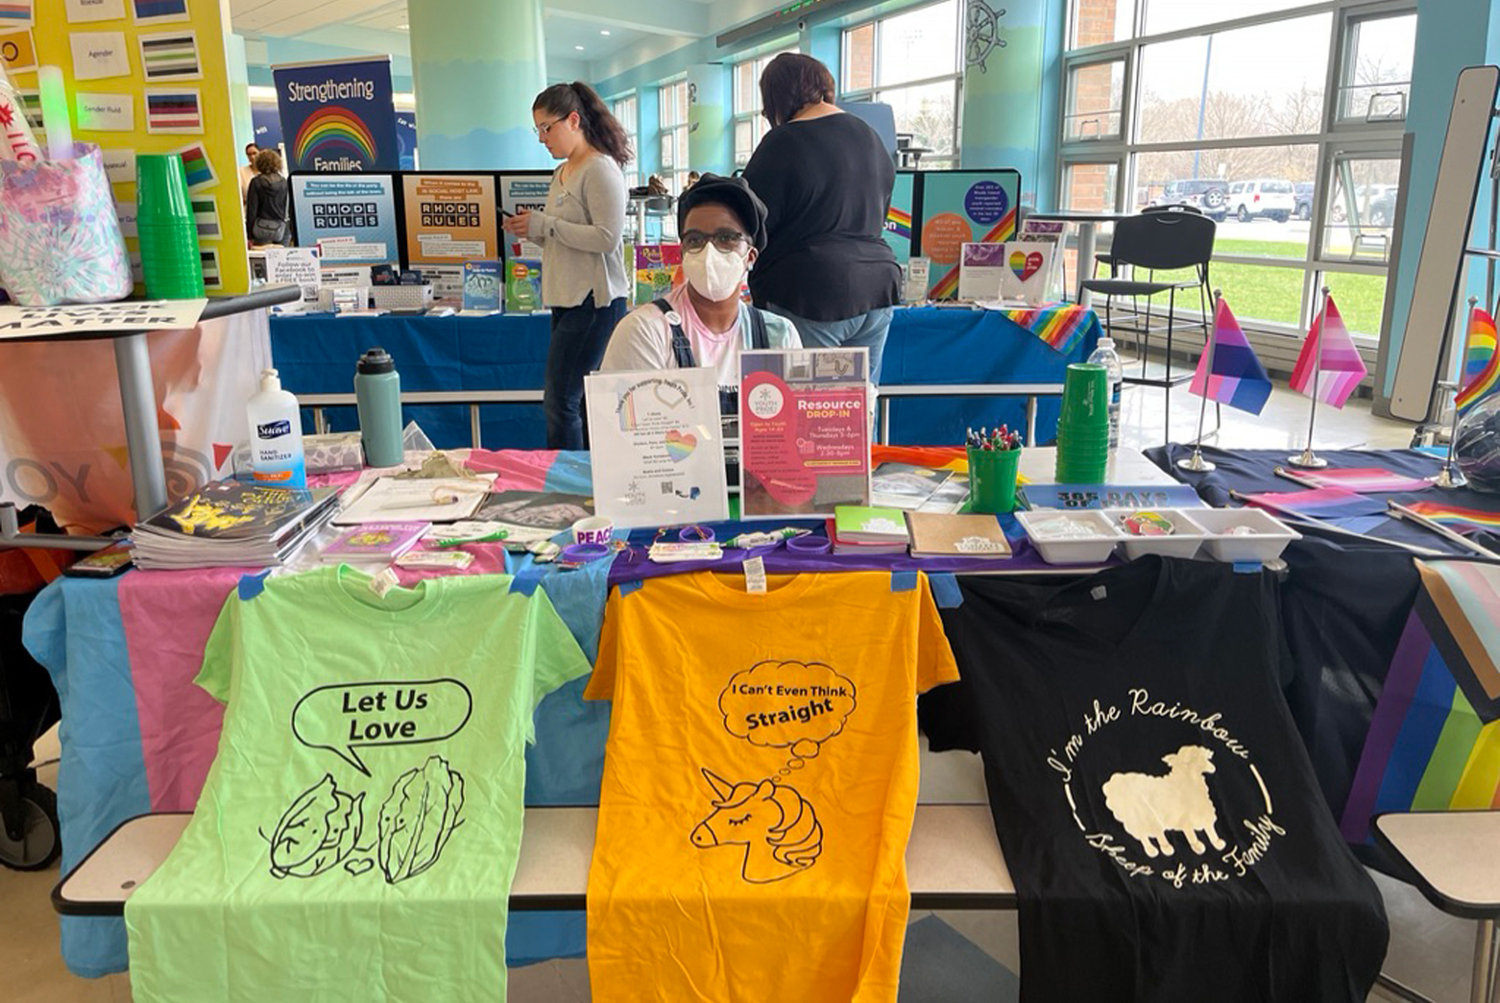 Youth Pride Inc. at an event at North Kingstown High School